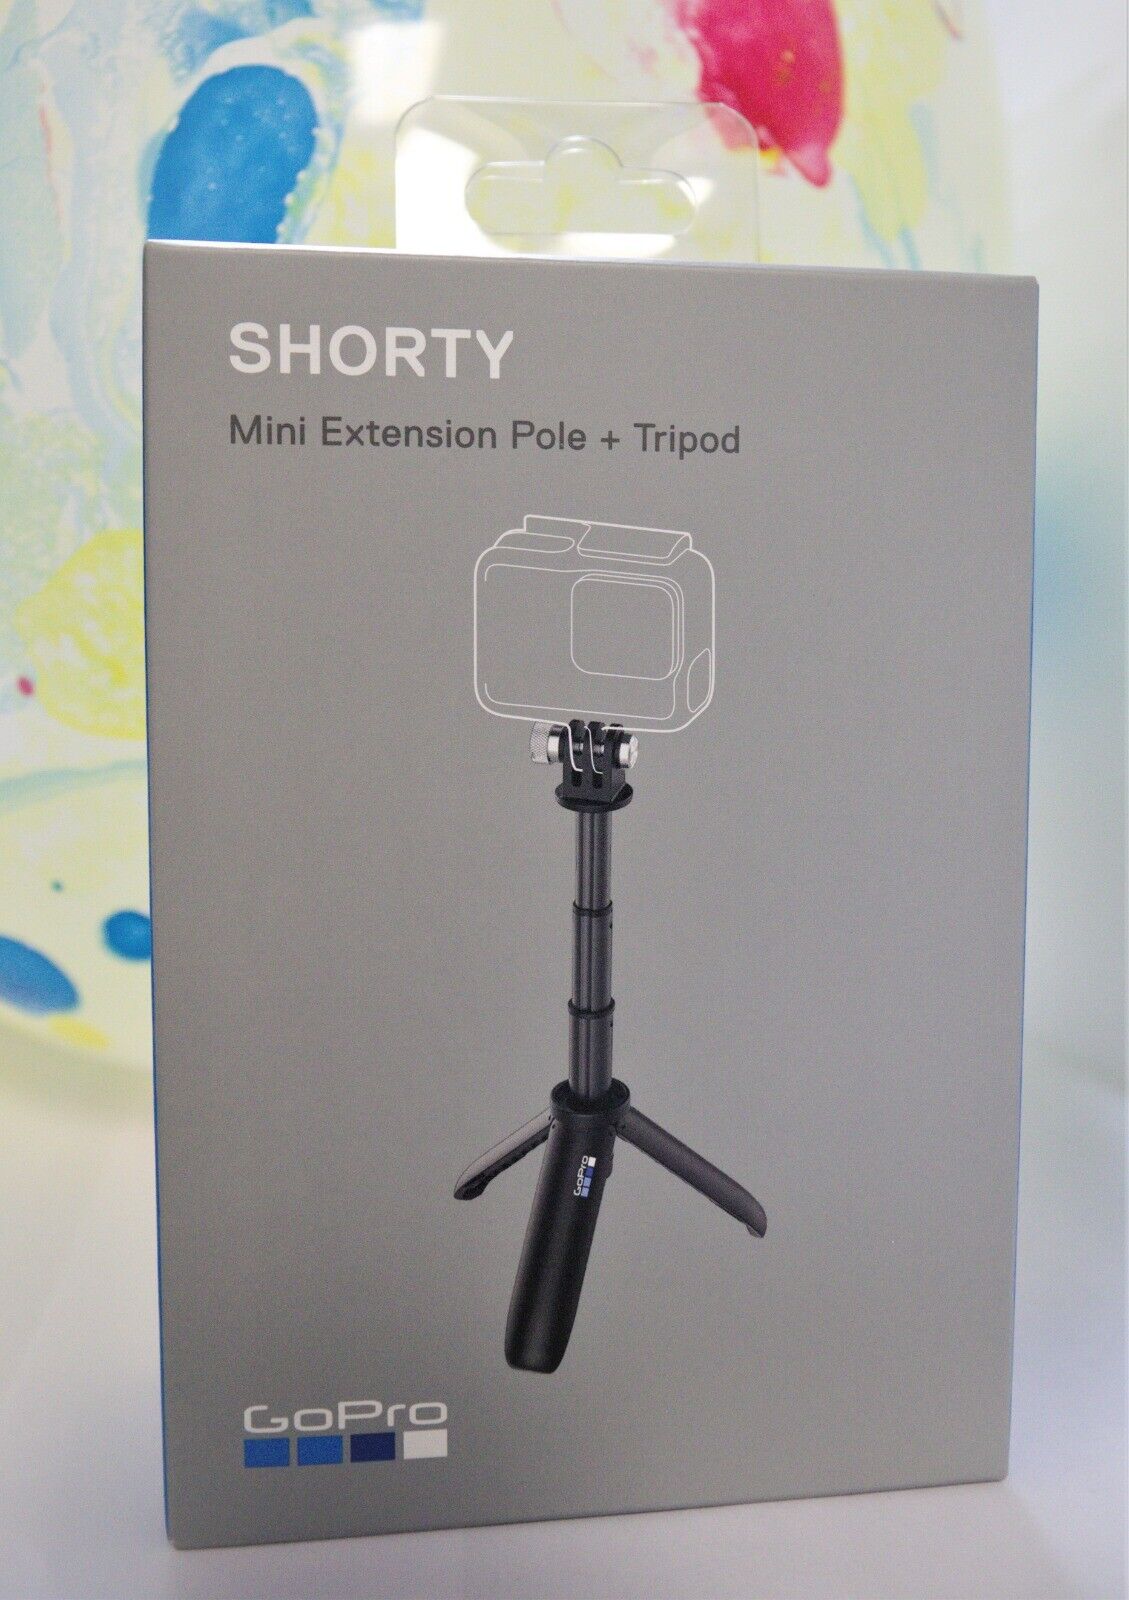 GoPro Shorty Mini Extension Pole + Tripod AFTTM-001 For All GoPro HERO7 HERO6  GoPro AFTTM-001